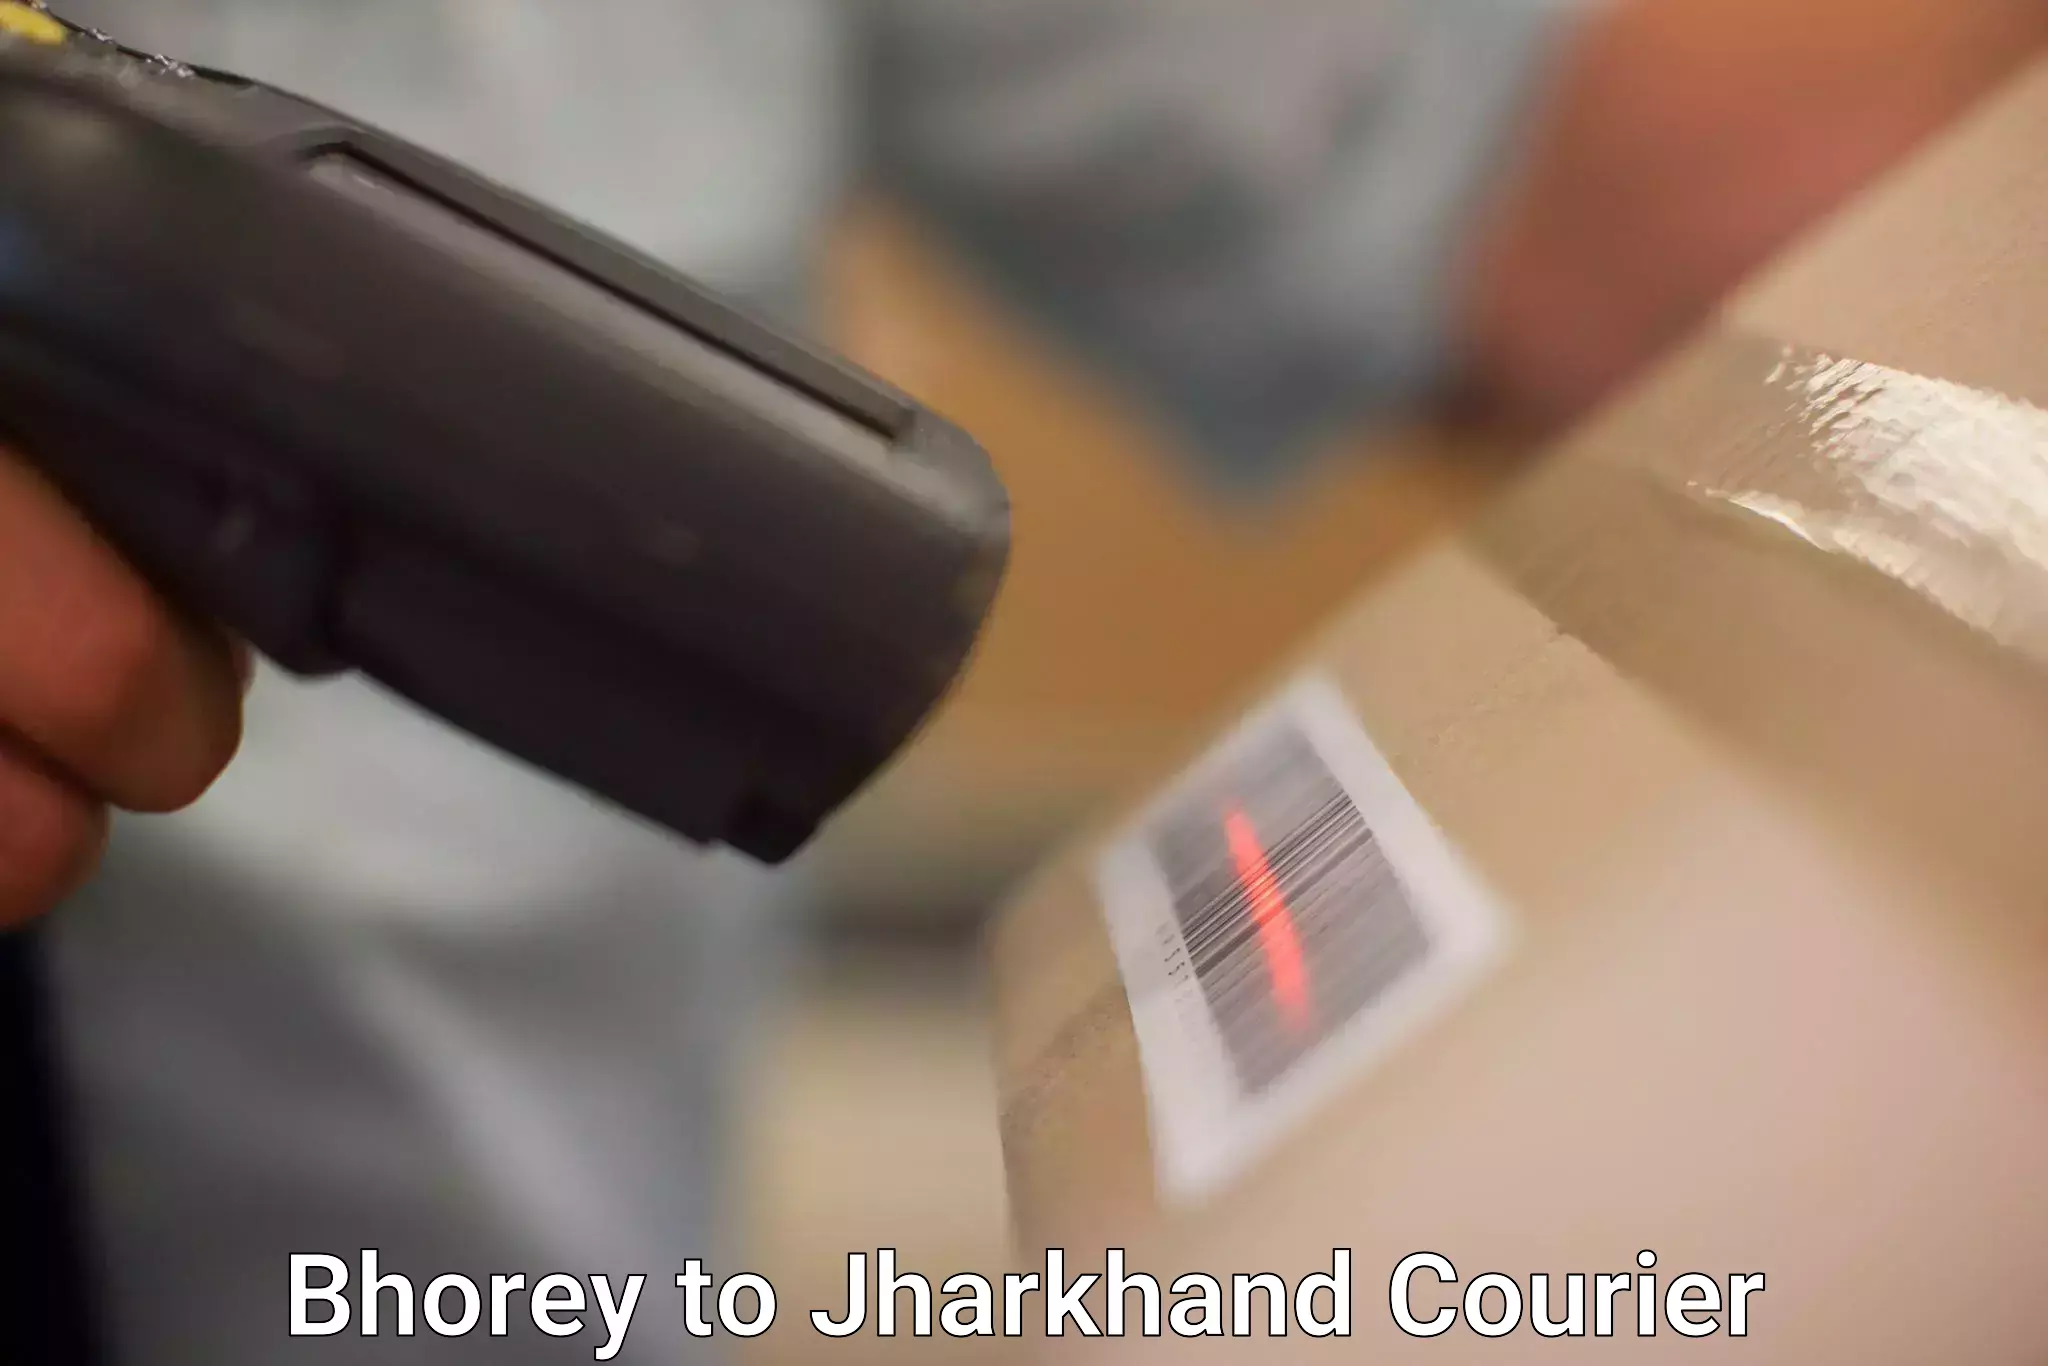 Easy return solutions Bhorey to Jharkhand